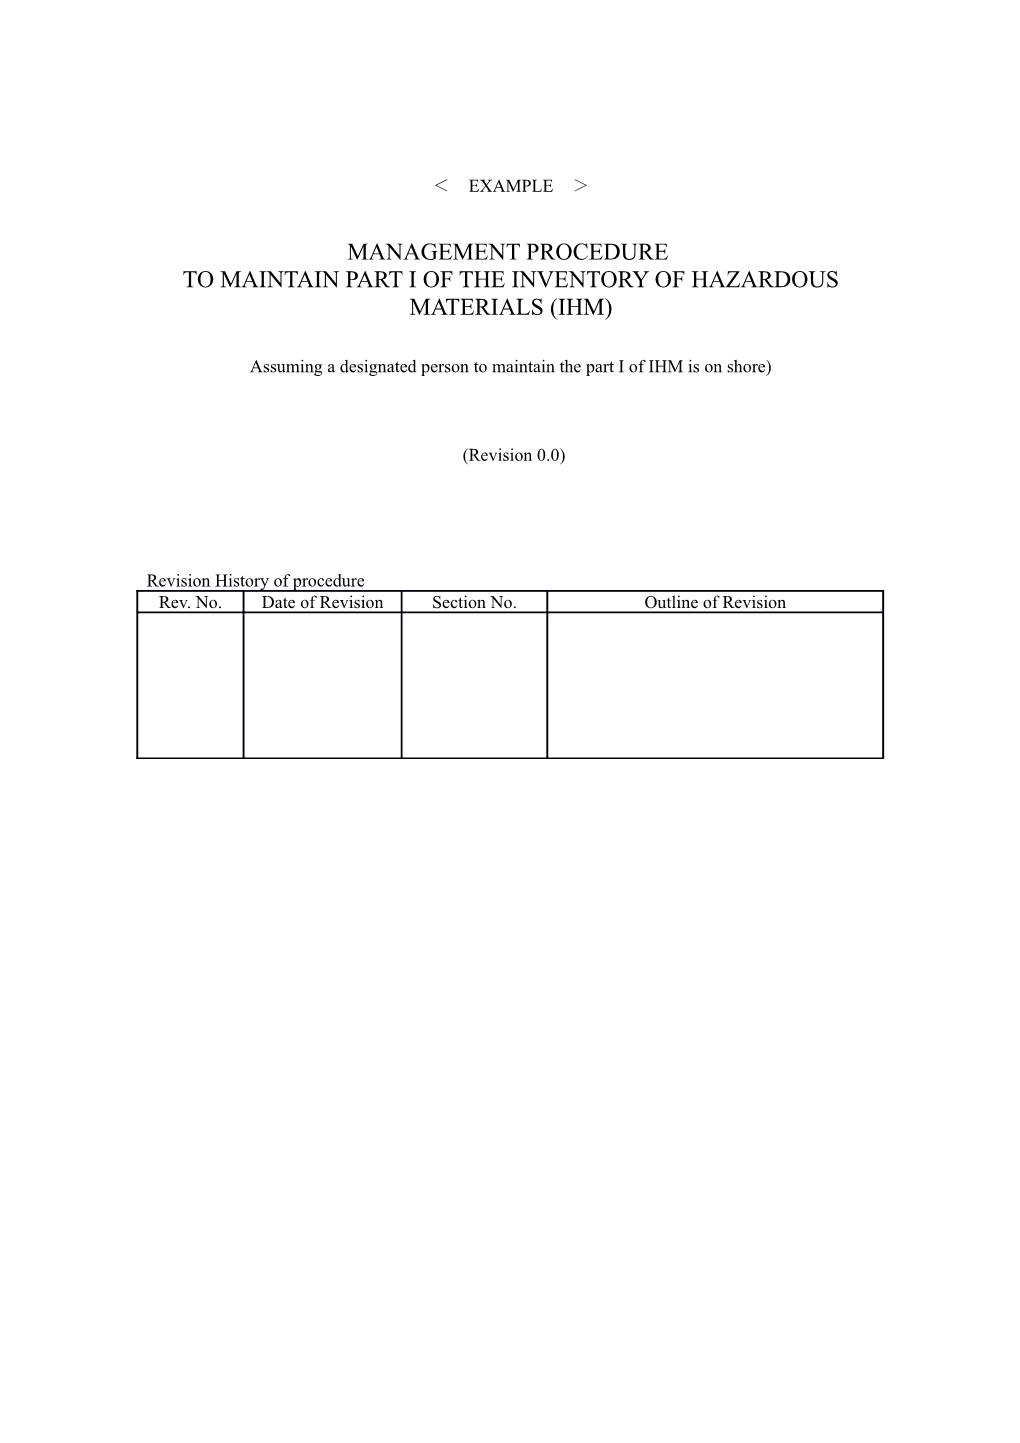 To Maintain Part I of the Inventory of Hazardous Materials (Ihm)